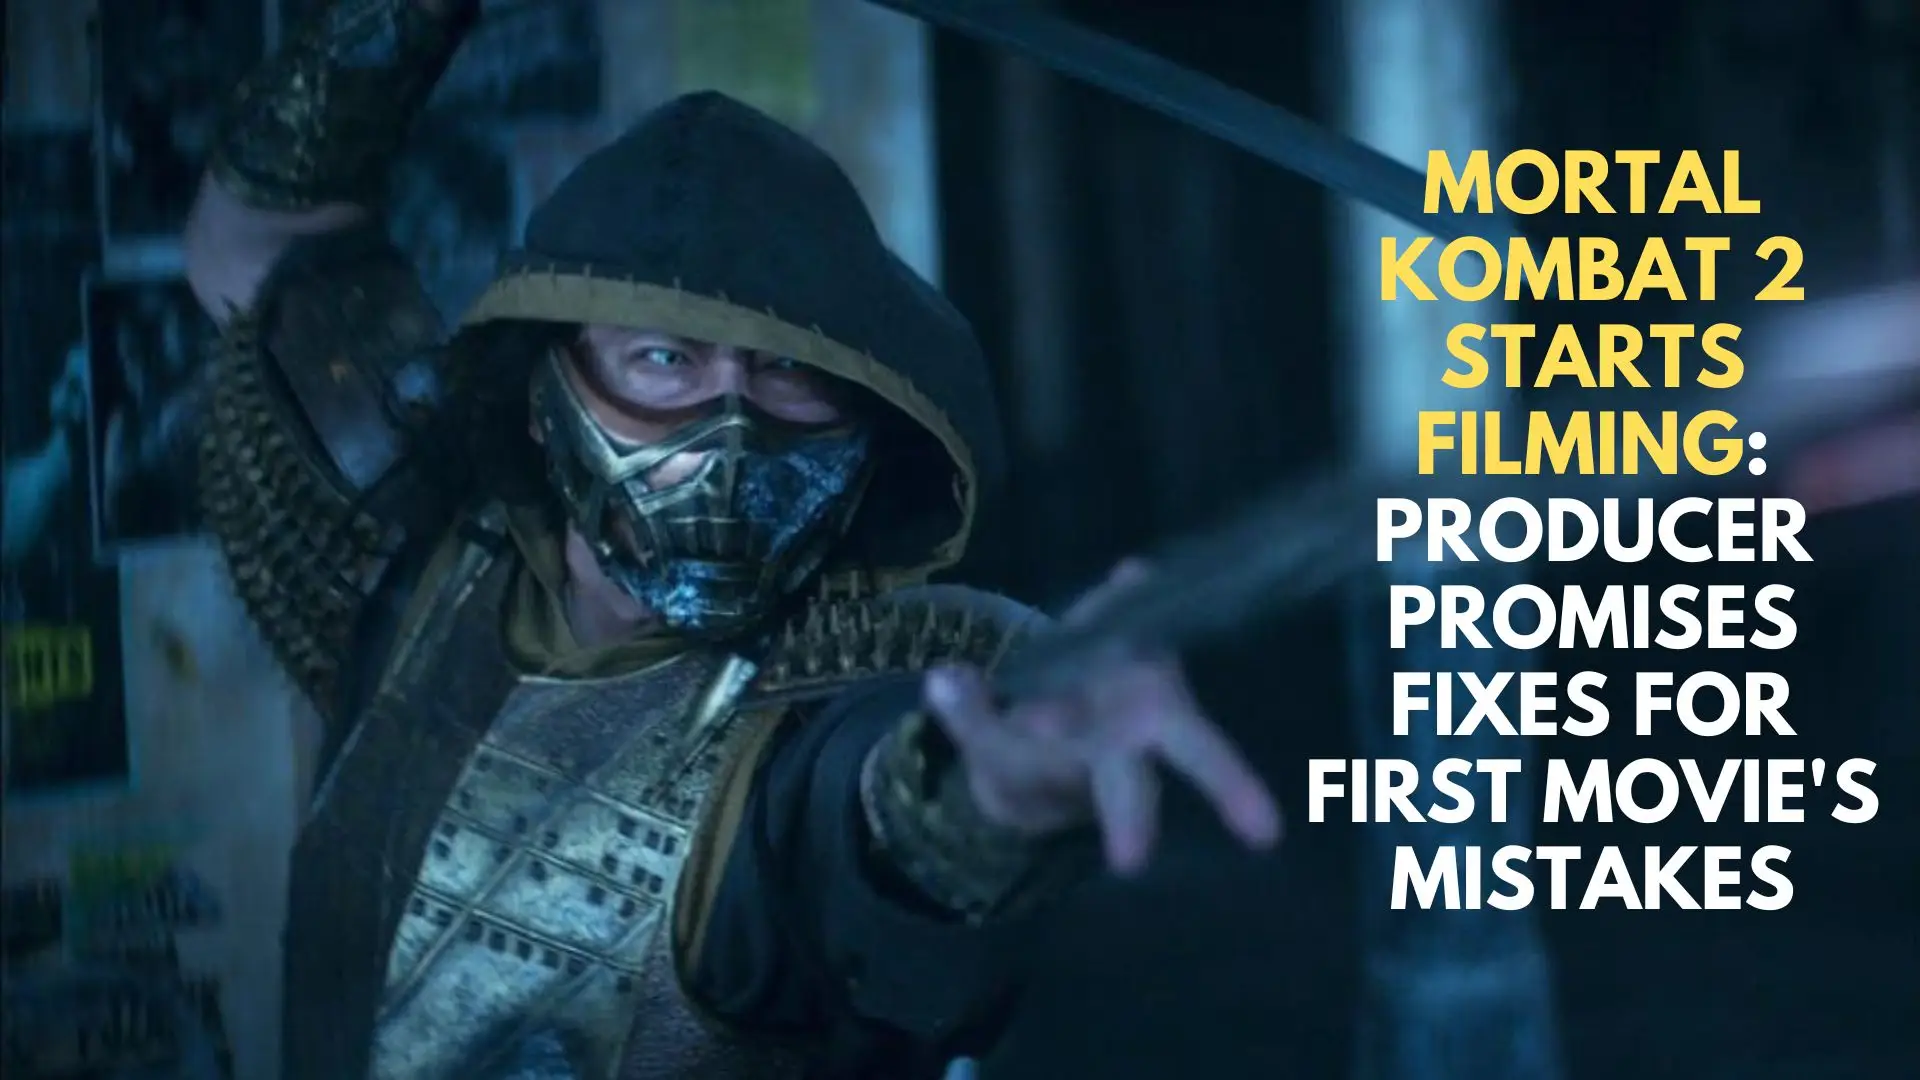 Mortal Kombat 2 Starts Filming: Producer Promises Fixes for First Movie's Mistakes